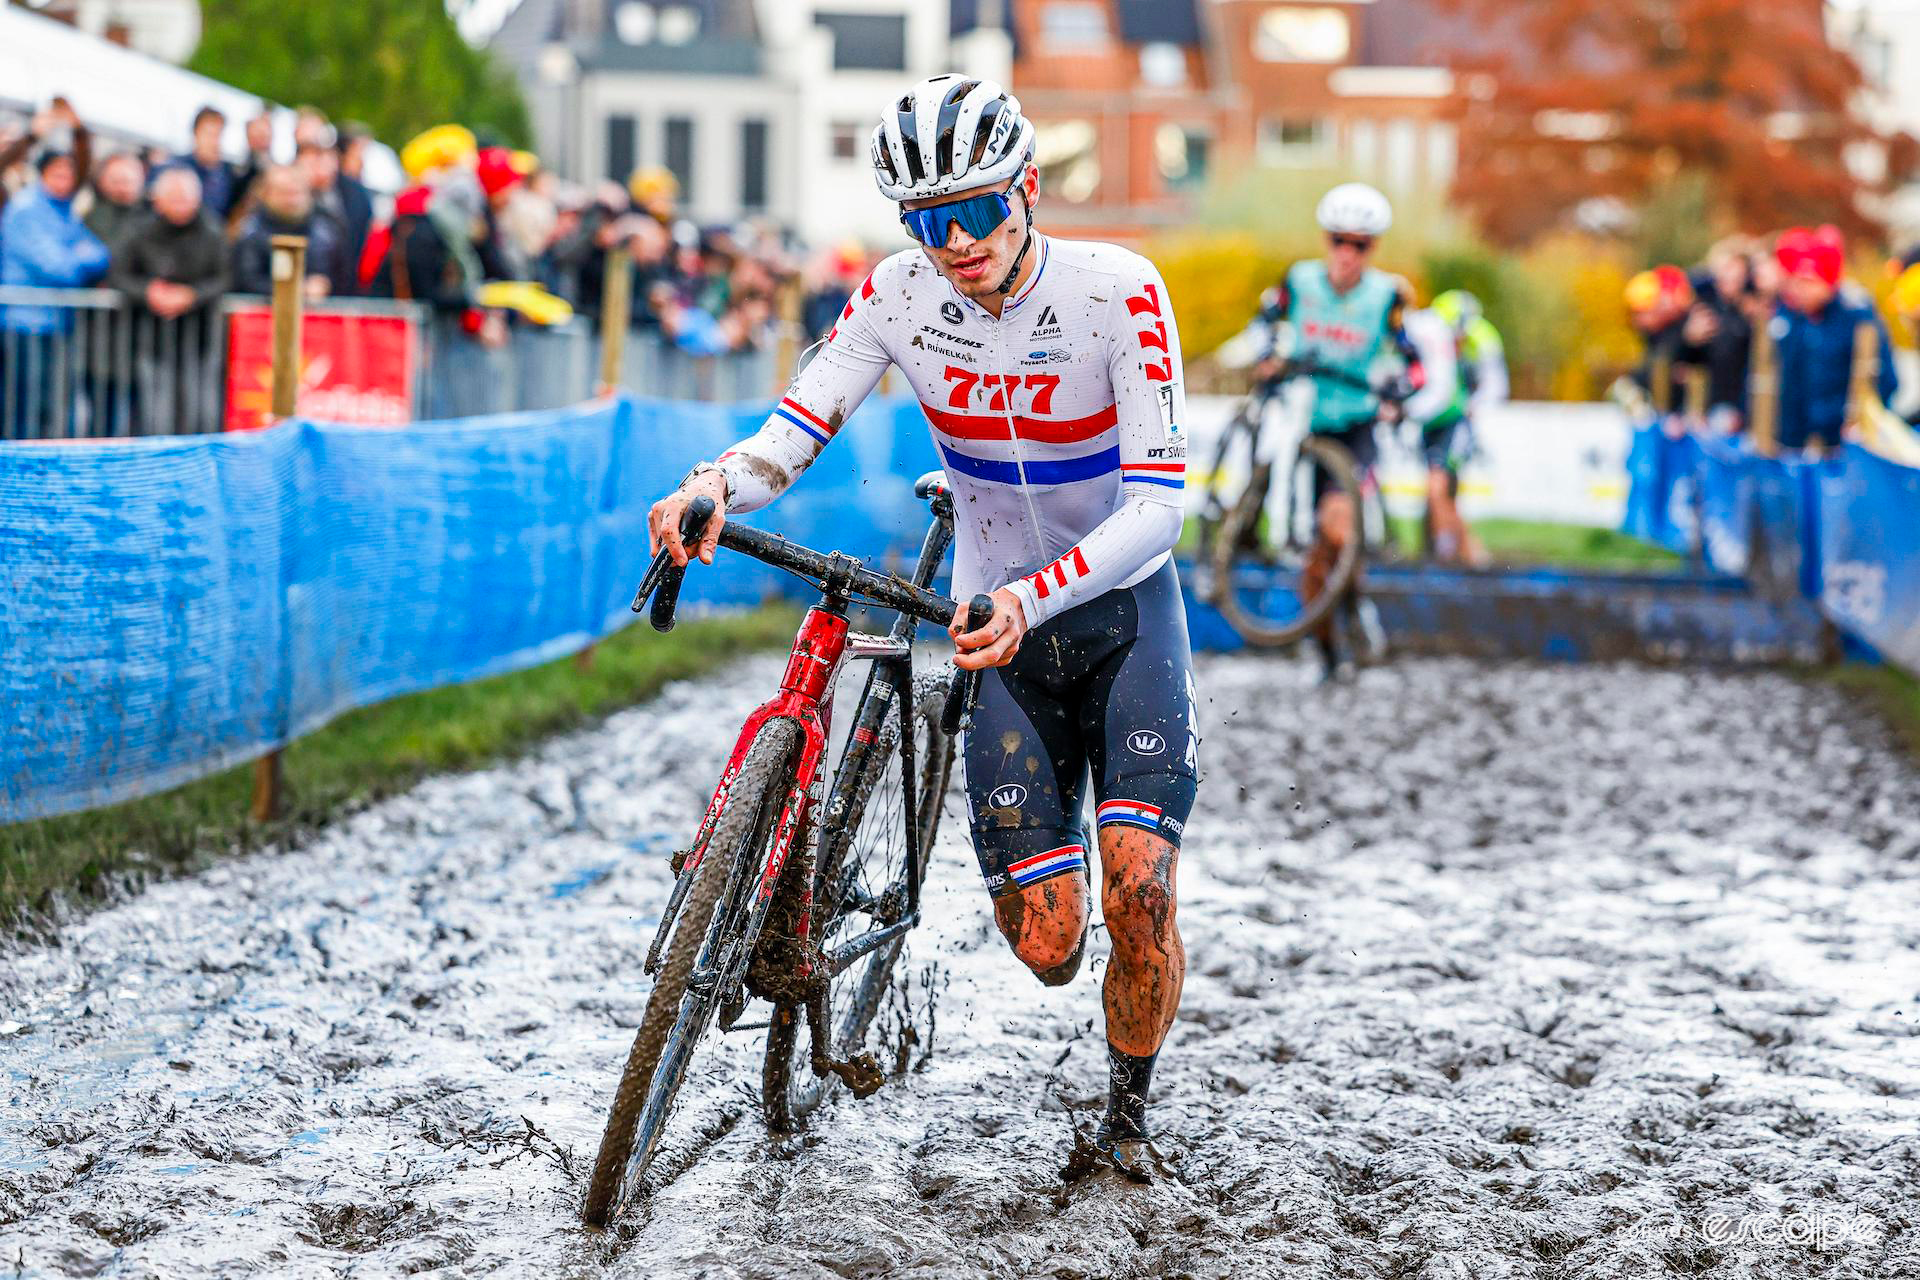 British national champion Cameron Mason splashes through thick, wet mud, running with his bike, at X20 Trofee Kortrijk, riders seen leaping the boards in the background.